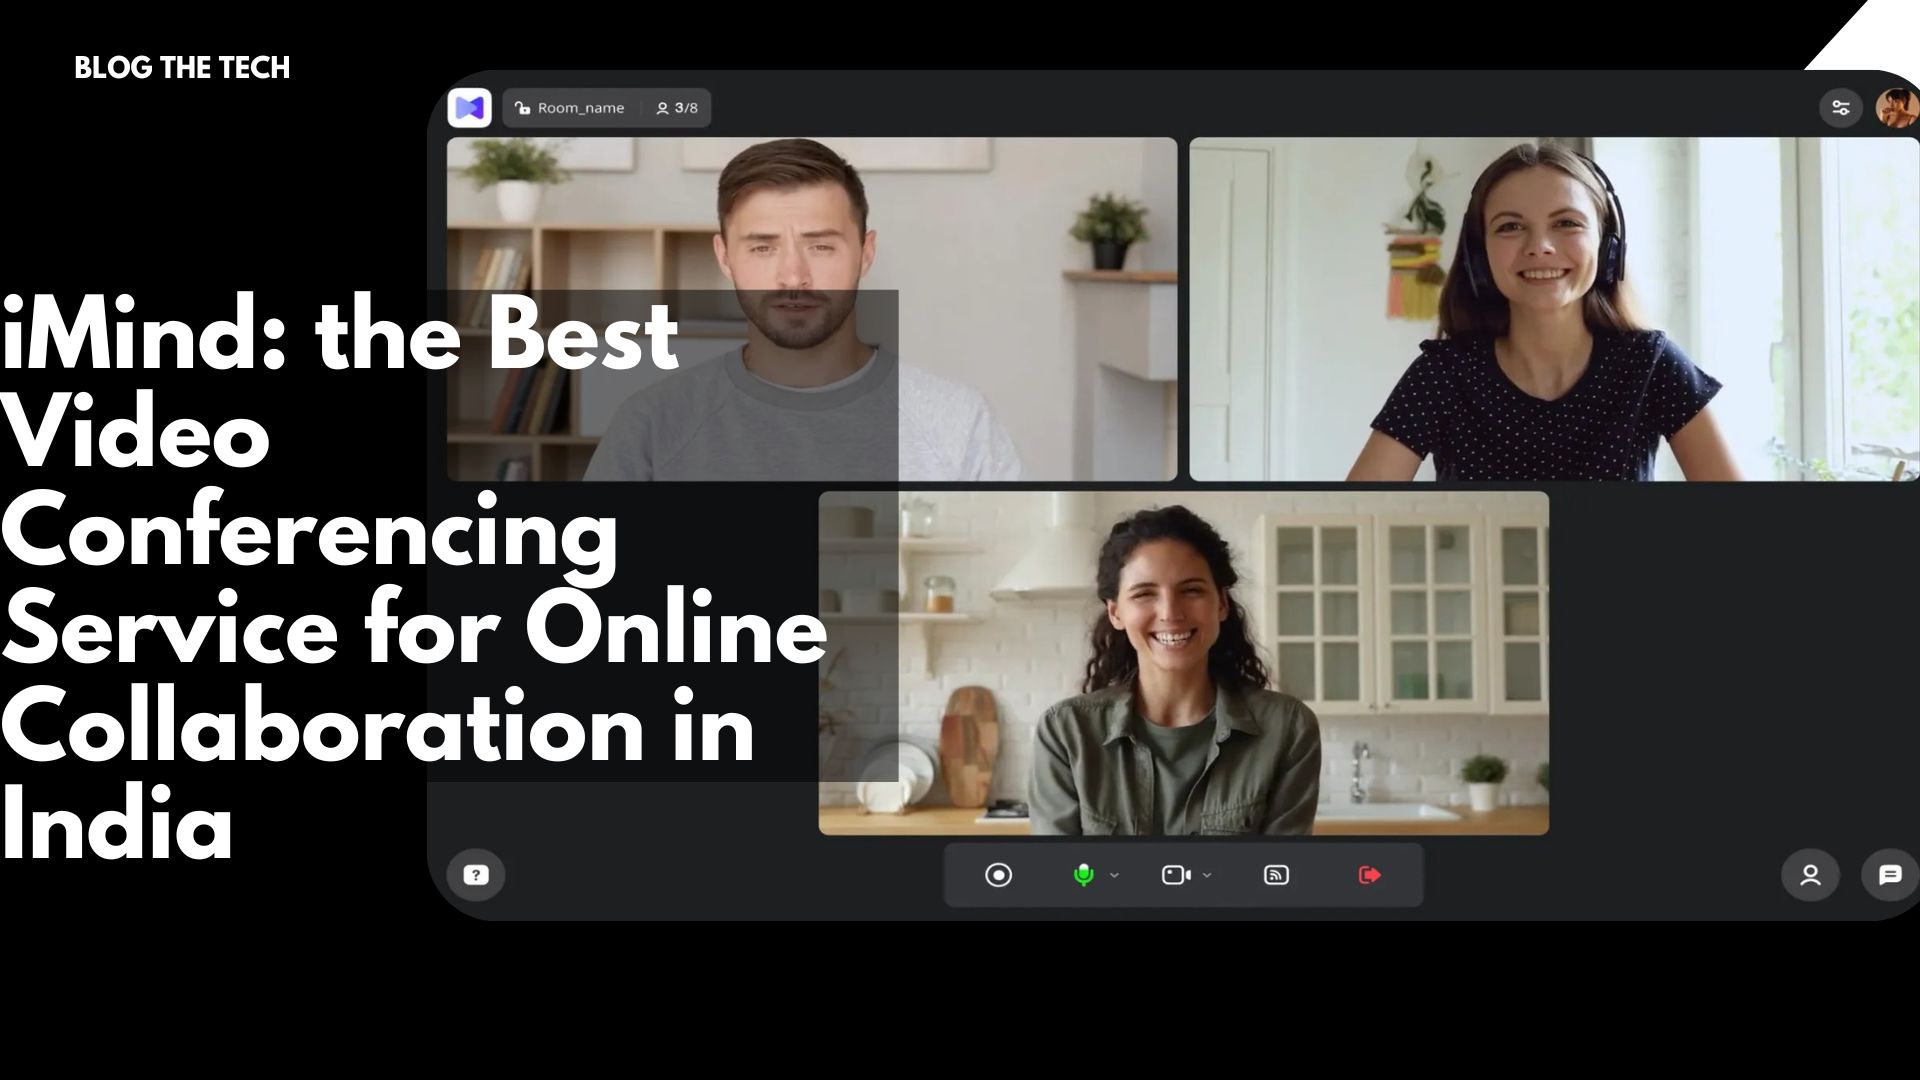 iMind: the Best Video Conferencing Service for Online Collaboration in India